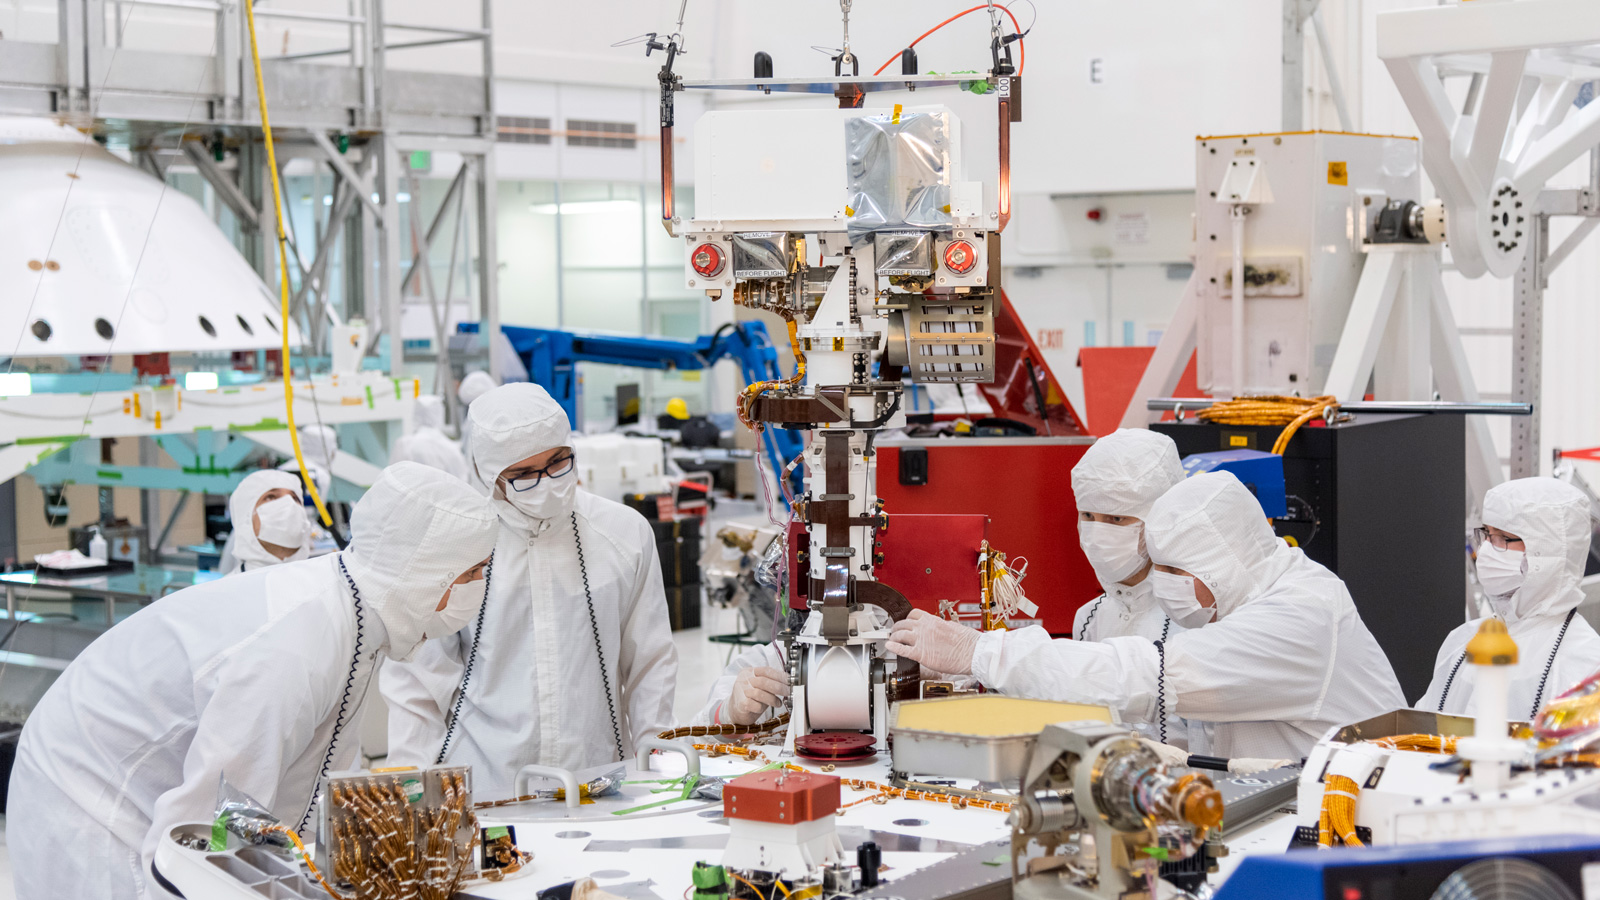 Engineers and technicians at NASA's Jet Propulsion Laboratory in Pasadena, California, install the remote sensing mast on the Mars 2020 rover.